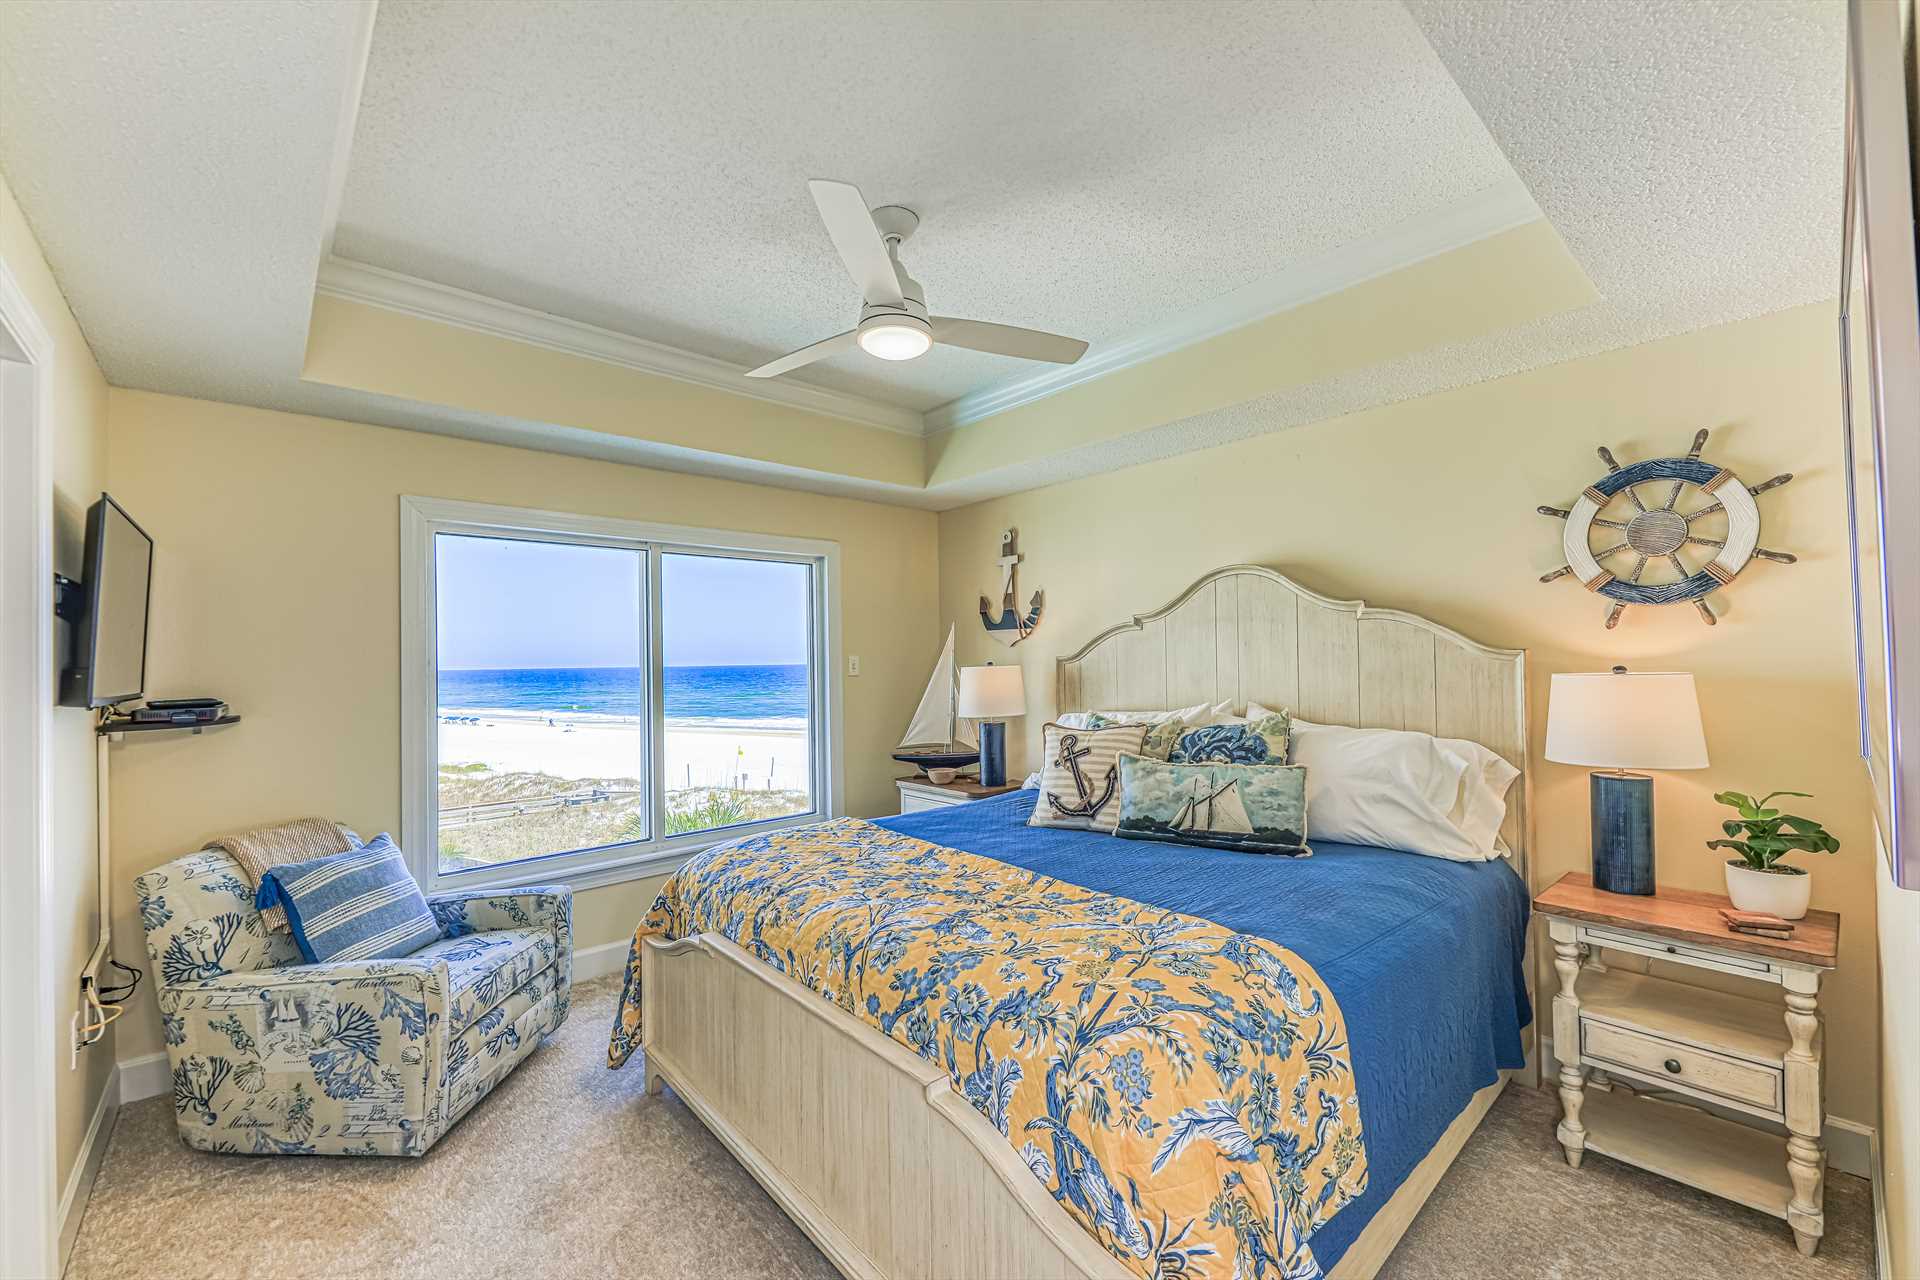 2nd King Bedroom with beach view